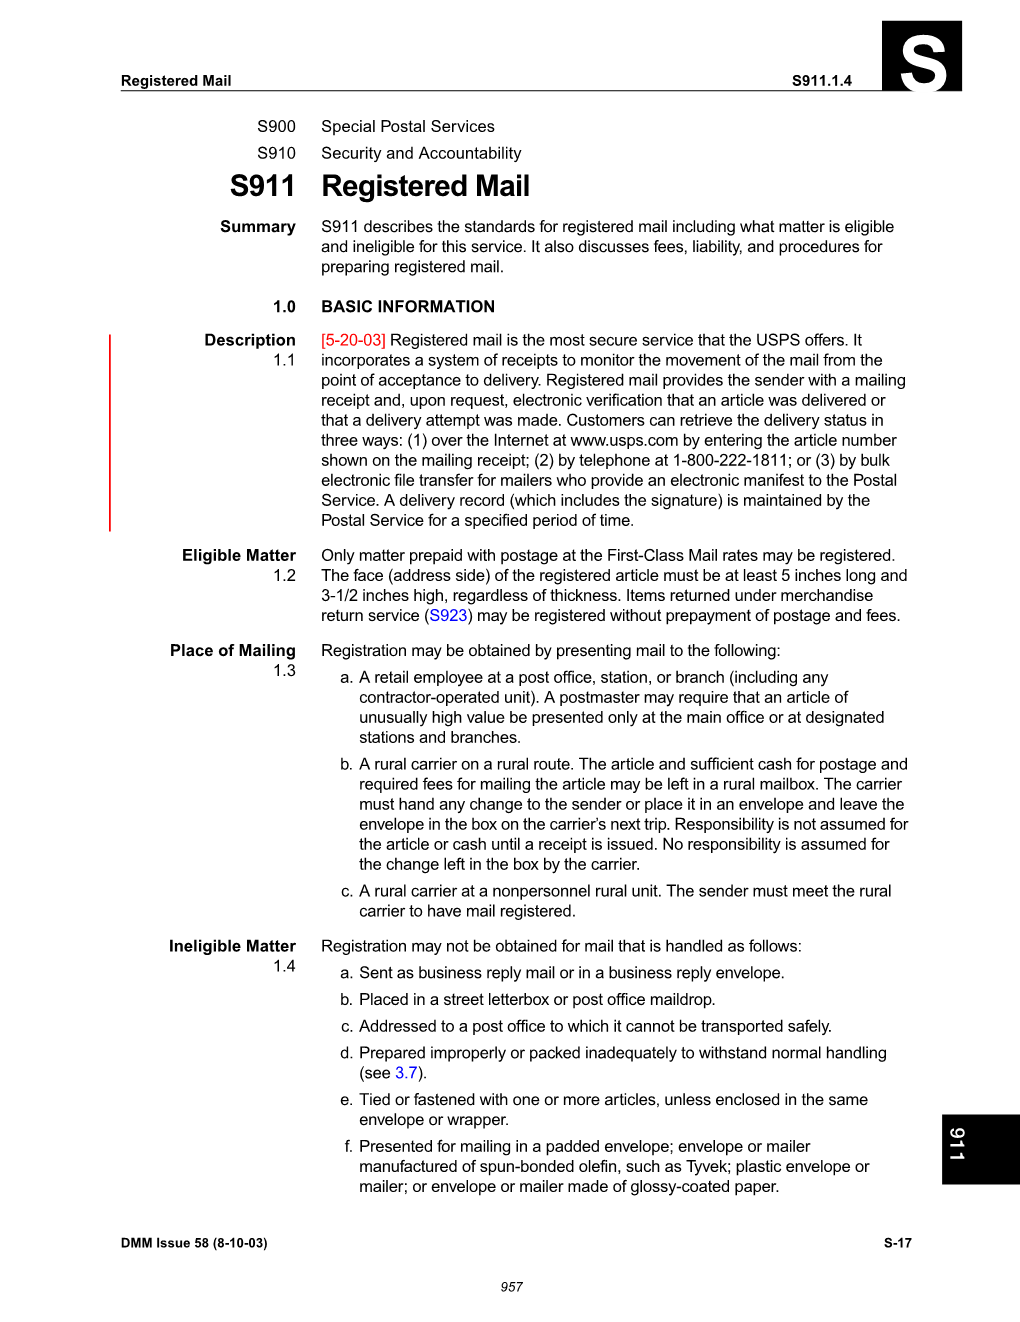 DMM S911 Registered Mail